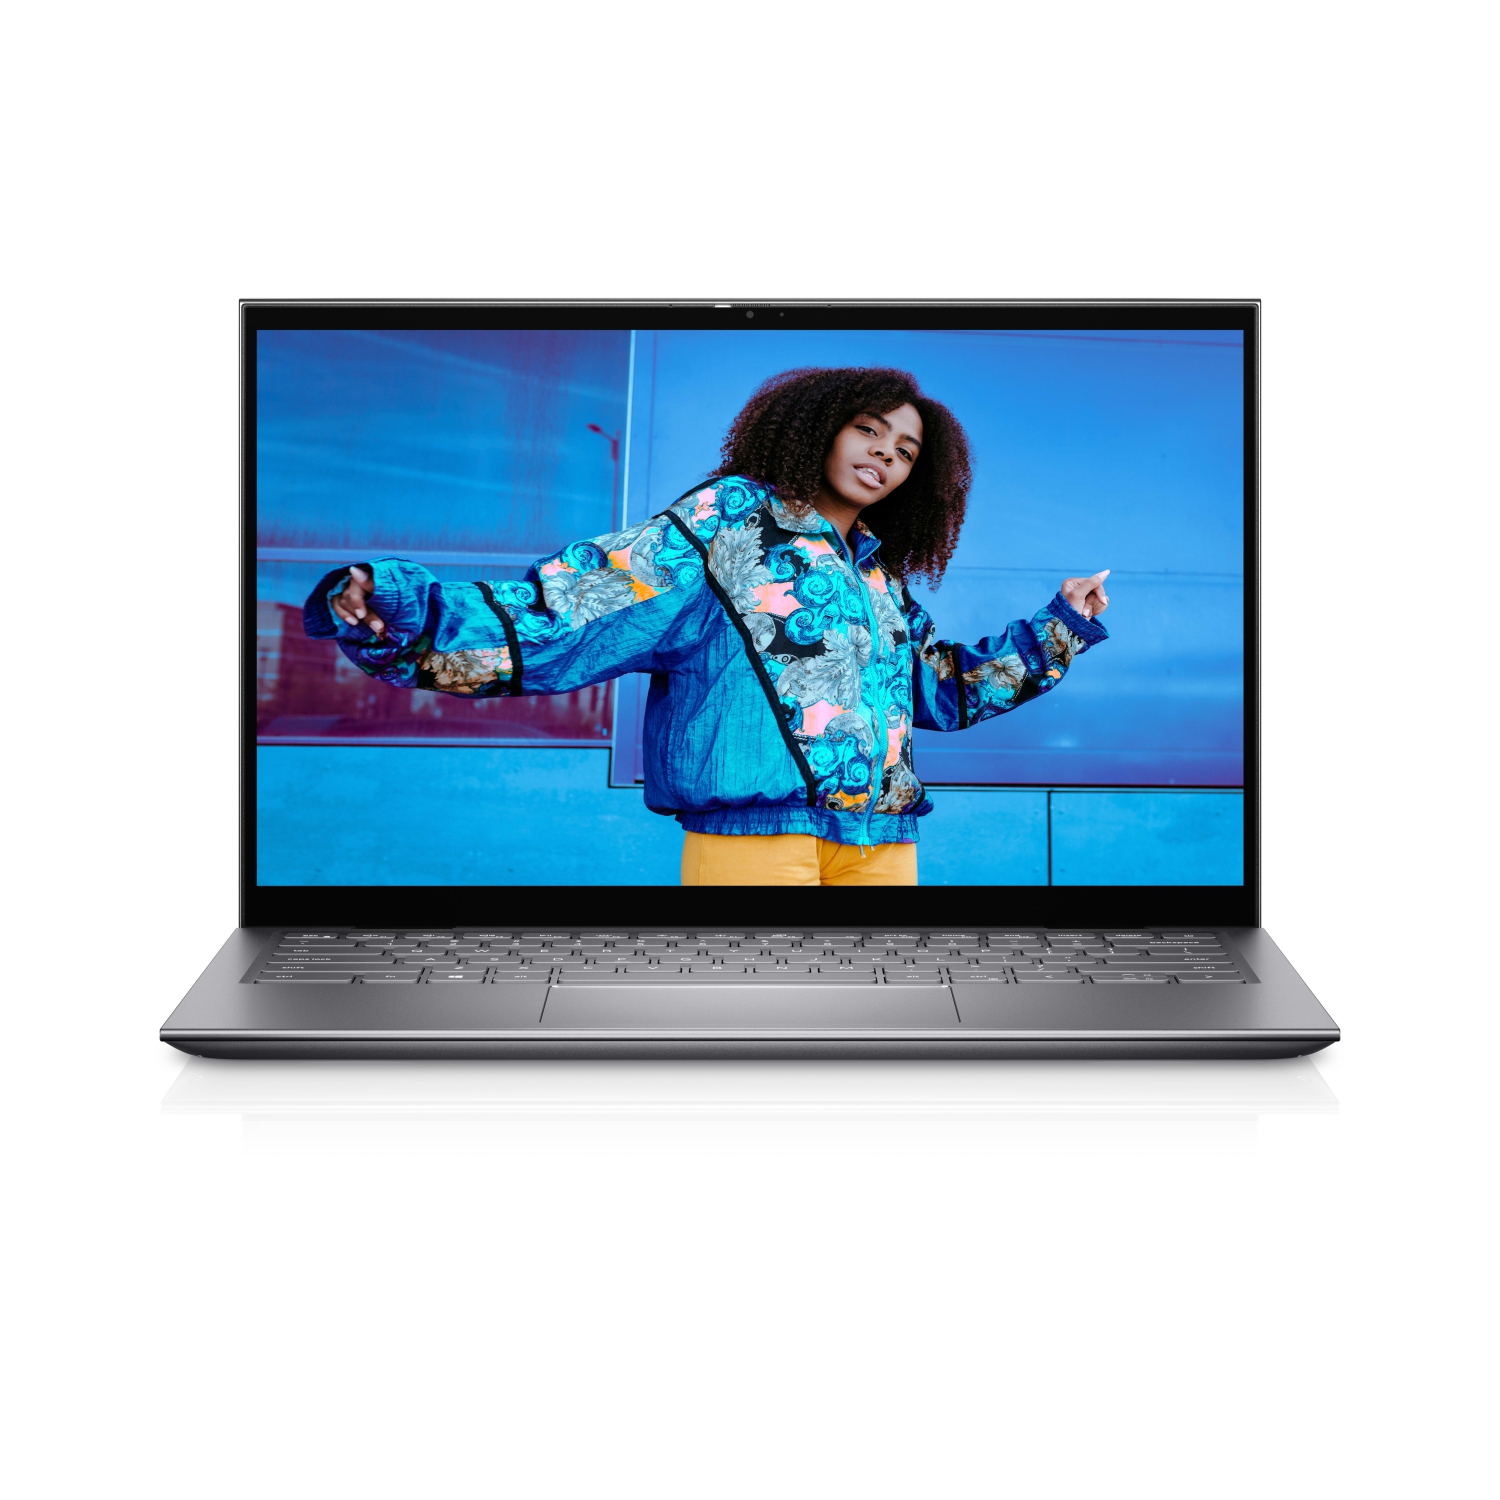 Refurbished (Excellent) – Dell Inspiron 5410 2-in-1 (2021) | 14" FHD Touch | Core i7 - 512GB SSD - 8GB RAM | 4 Cores @ 5 GHz - 11th Gen CPU